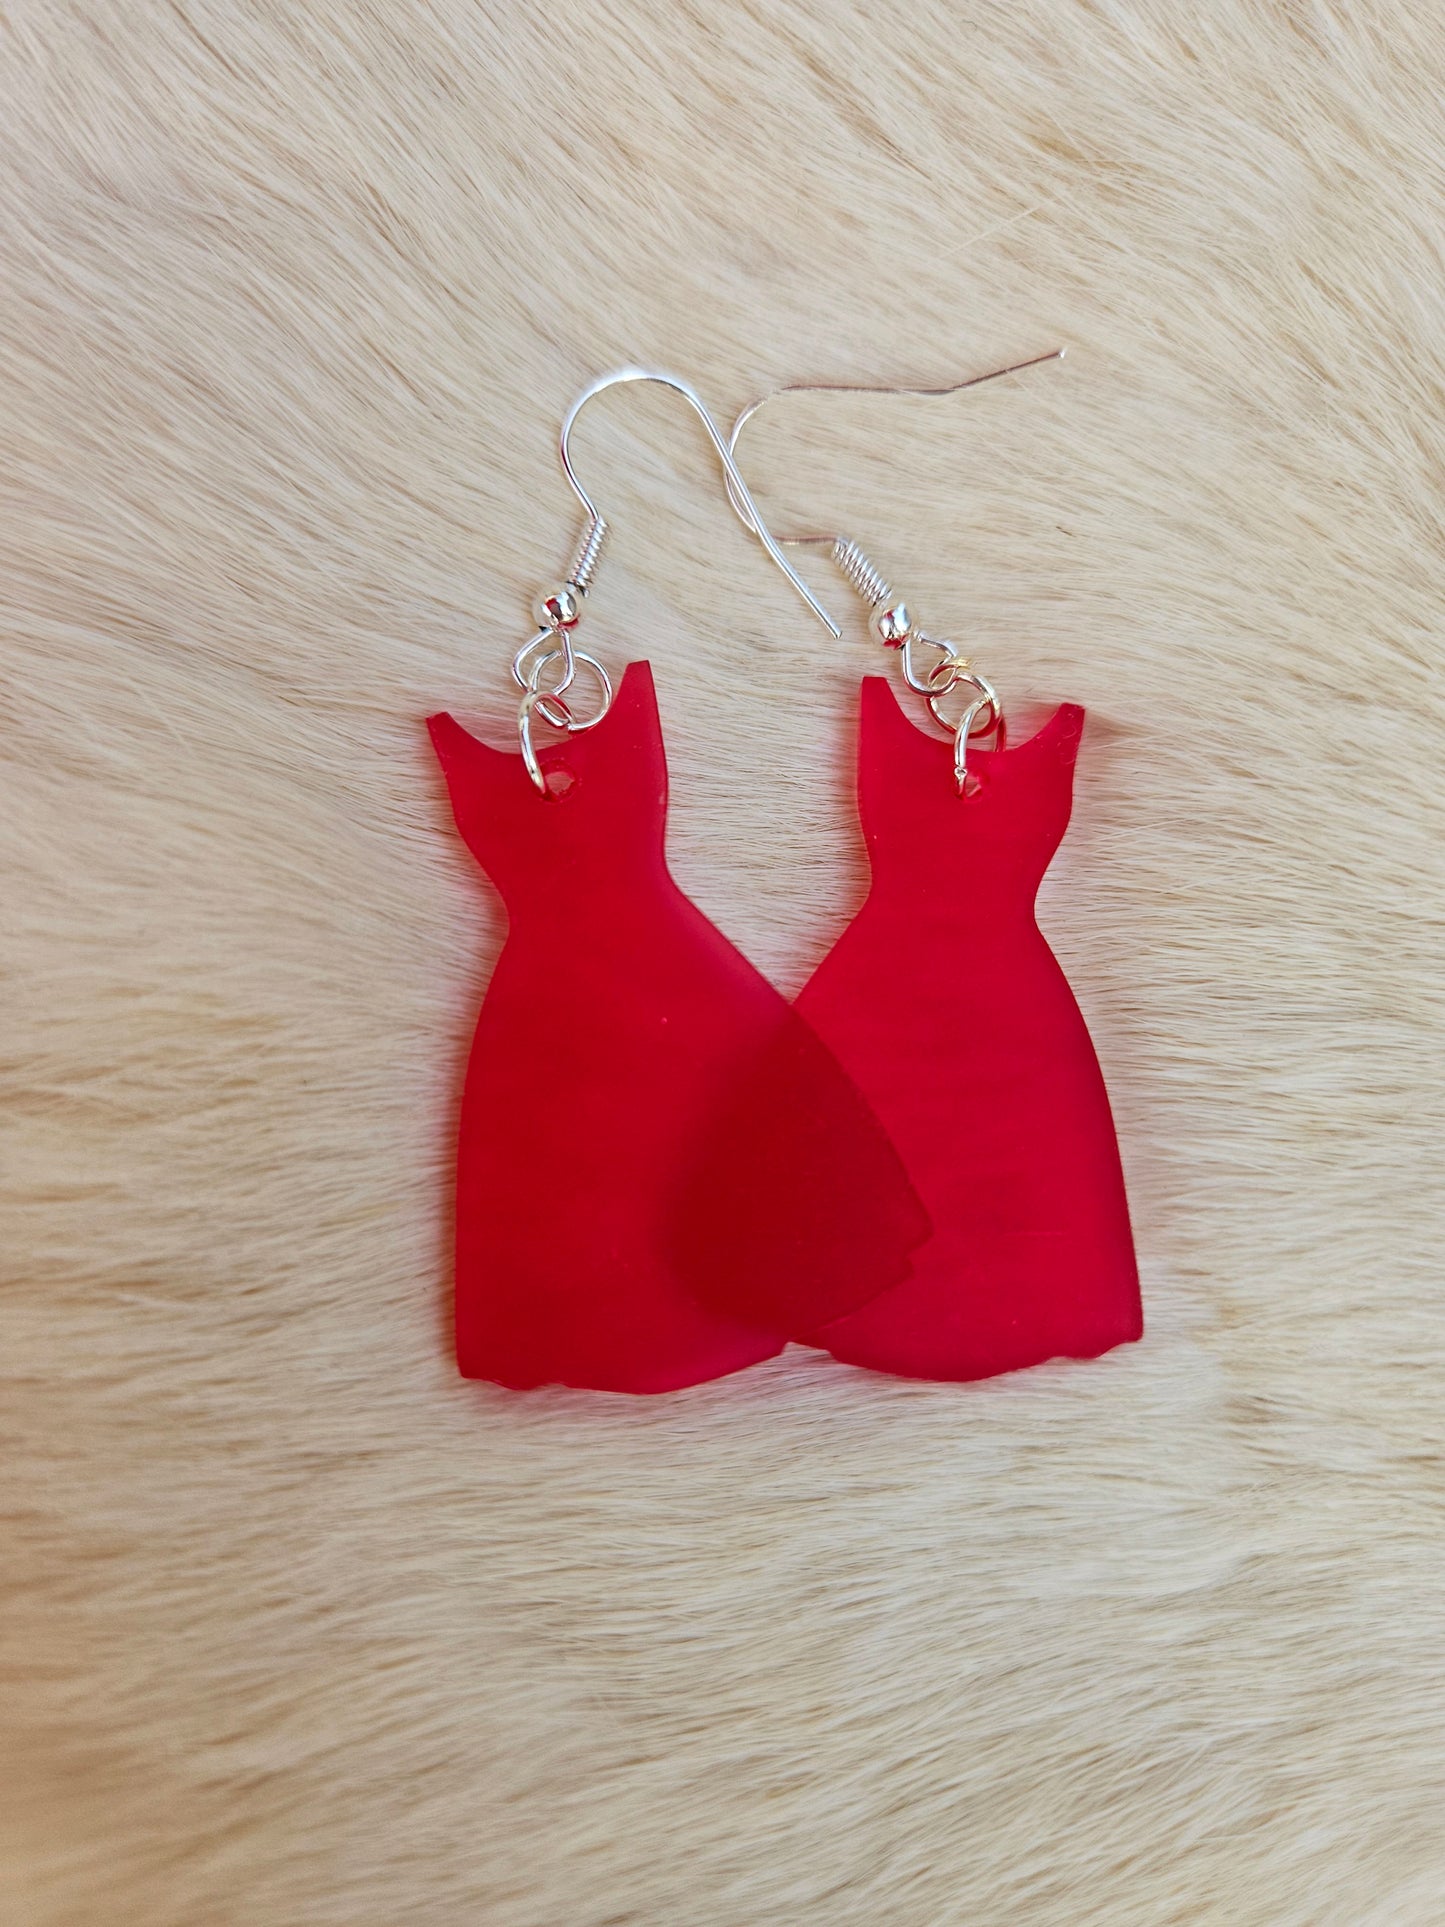 Red Dress Frosted Acrylic Earrings